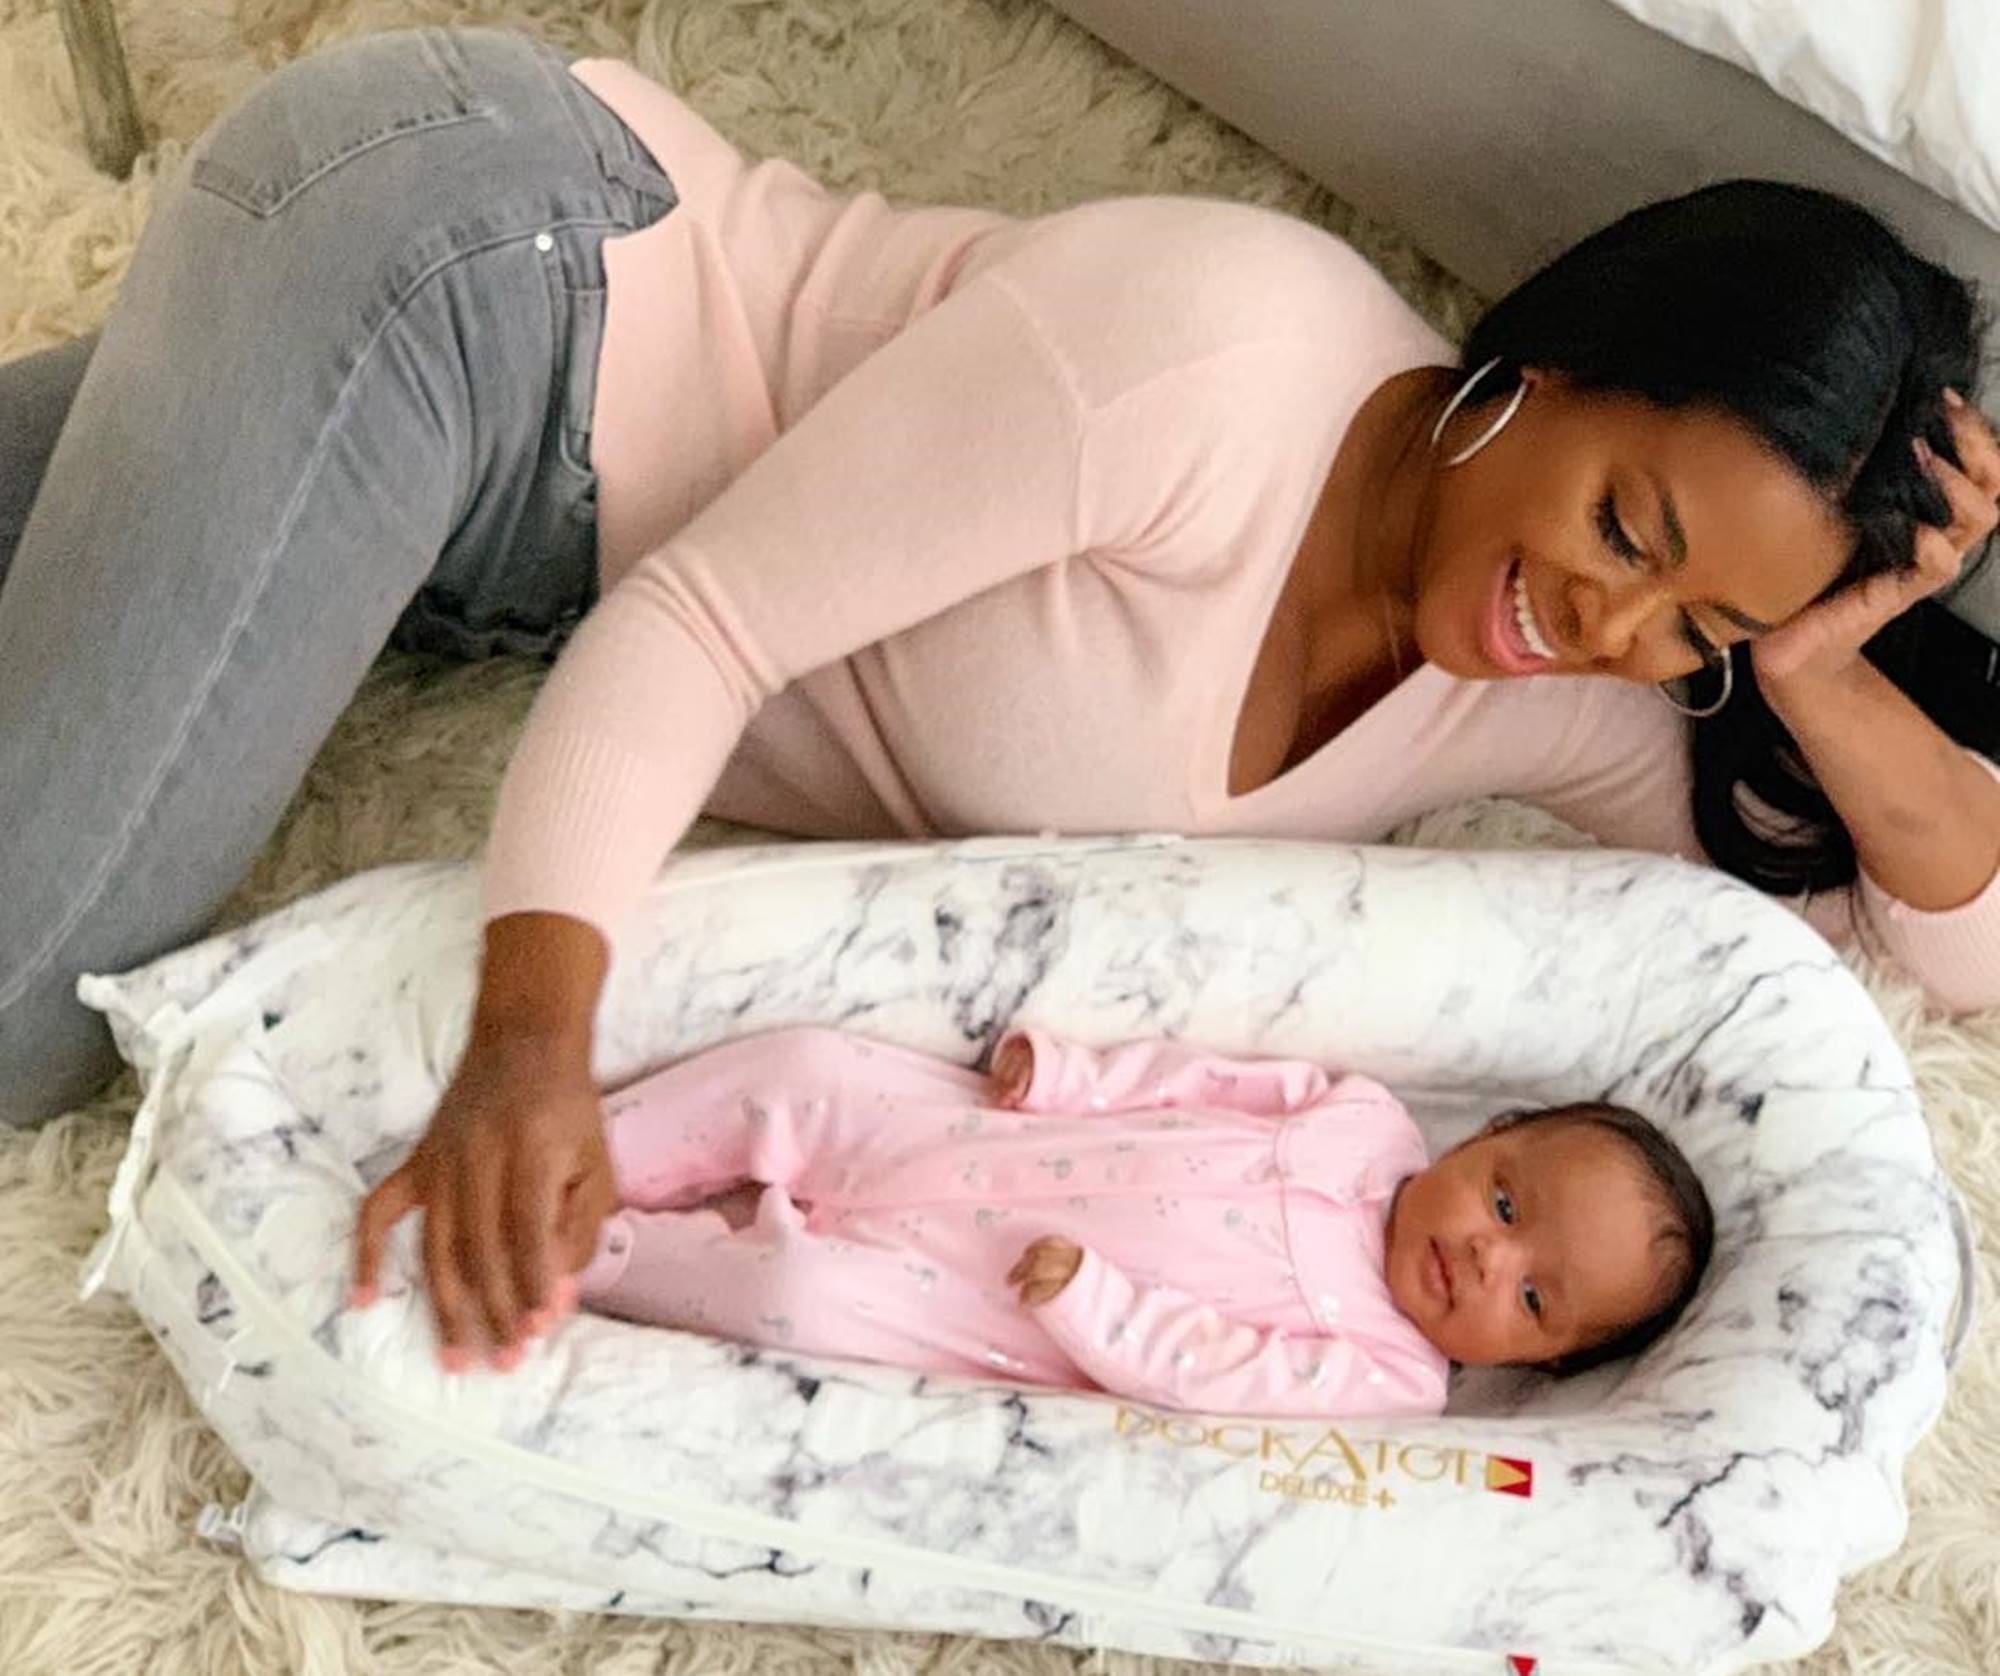 Kenya Moore Posts A Video With Marc Daly Teaching Their Daughter Brooklyn How To Swim And It's The Cutest Thing You'll See Today